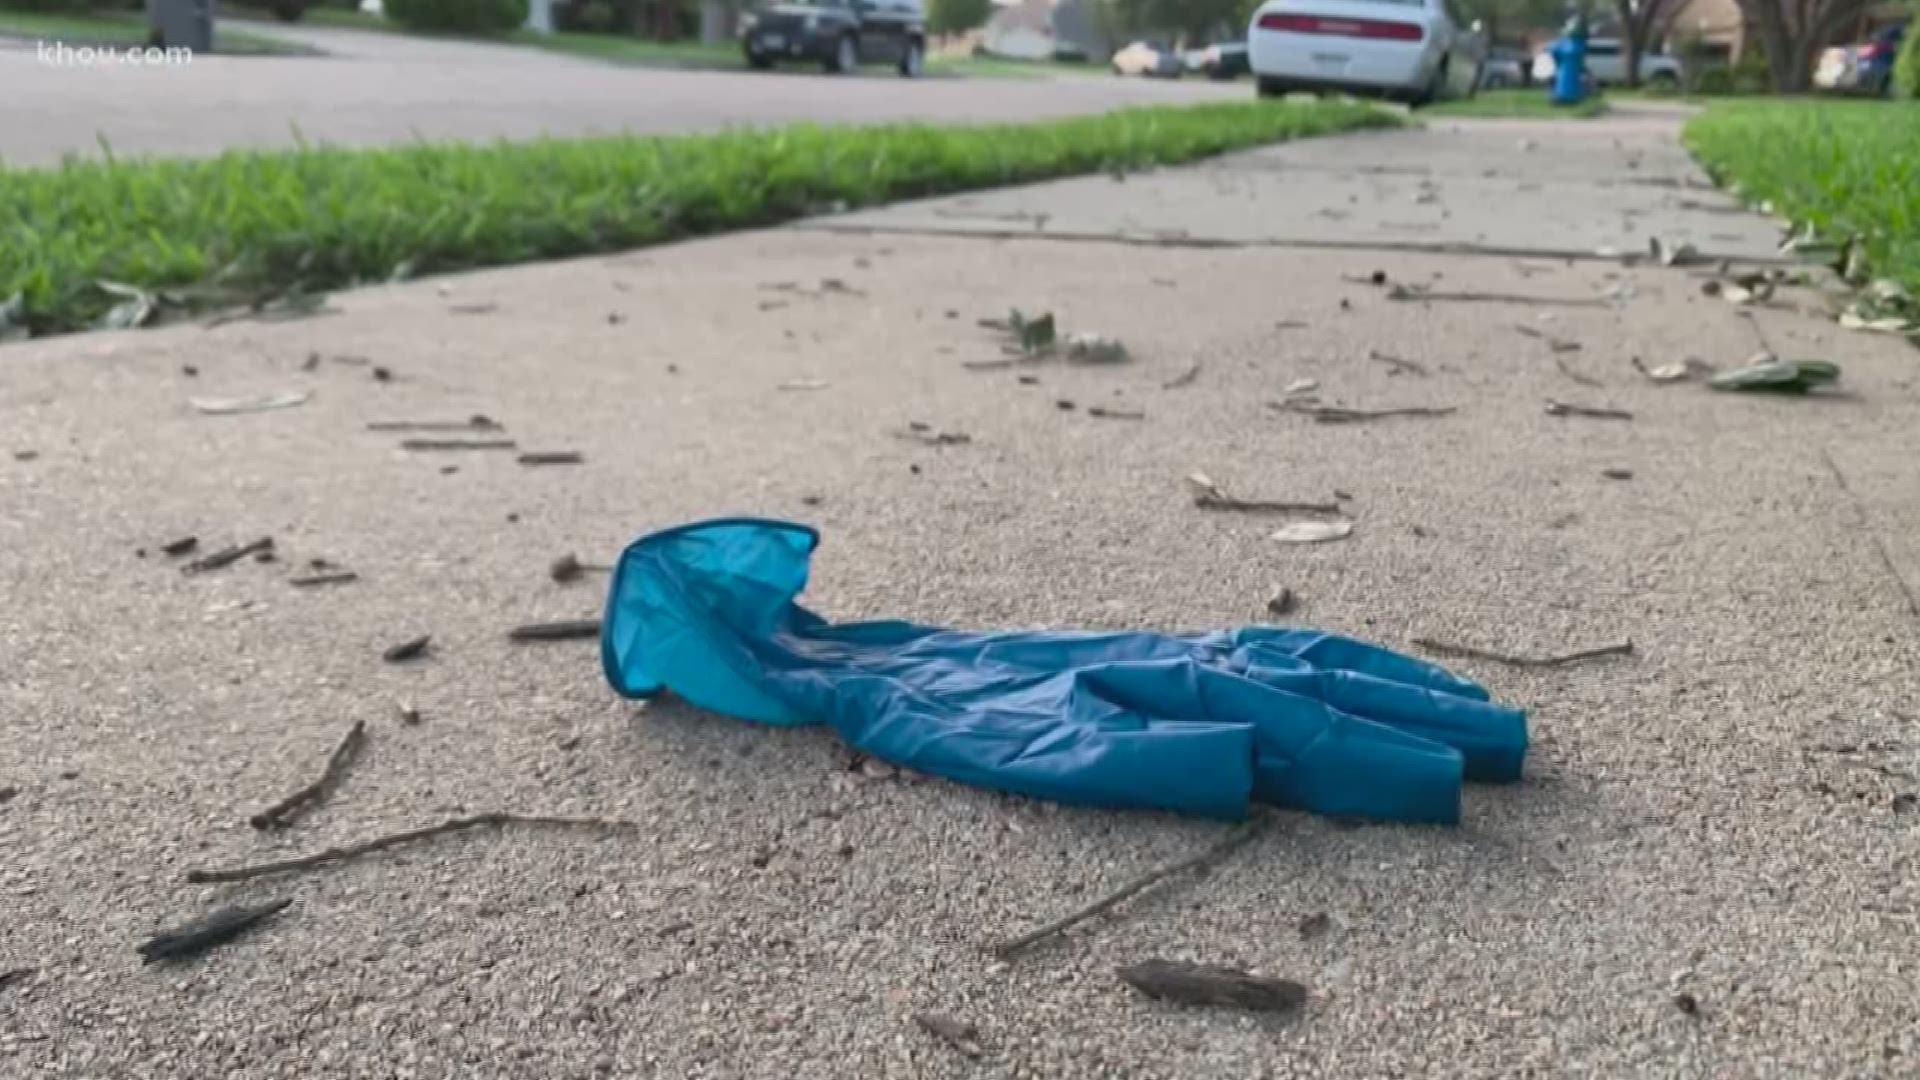 The Texas Department of Transportation said since recommendations to wear masks and gloves went out they’ve seen a spike in PPE litter in Houston and across Texas.